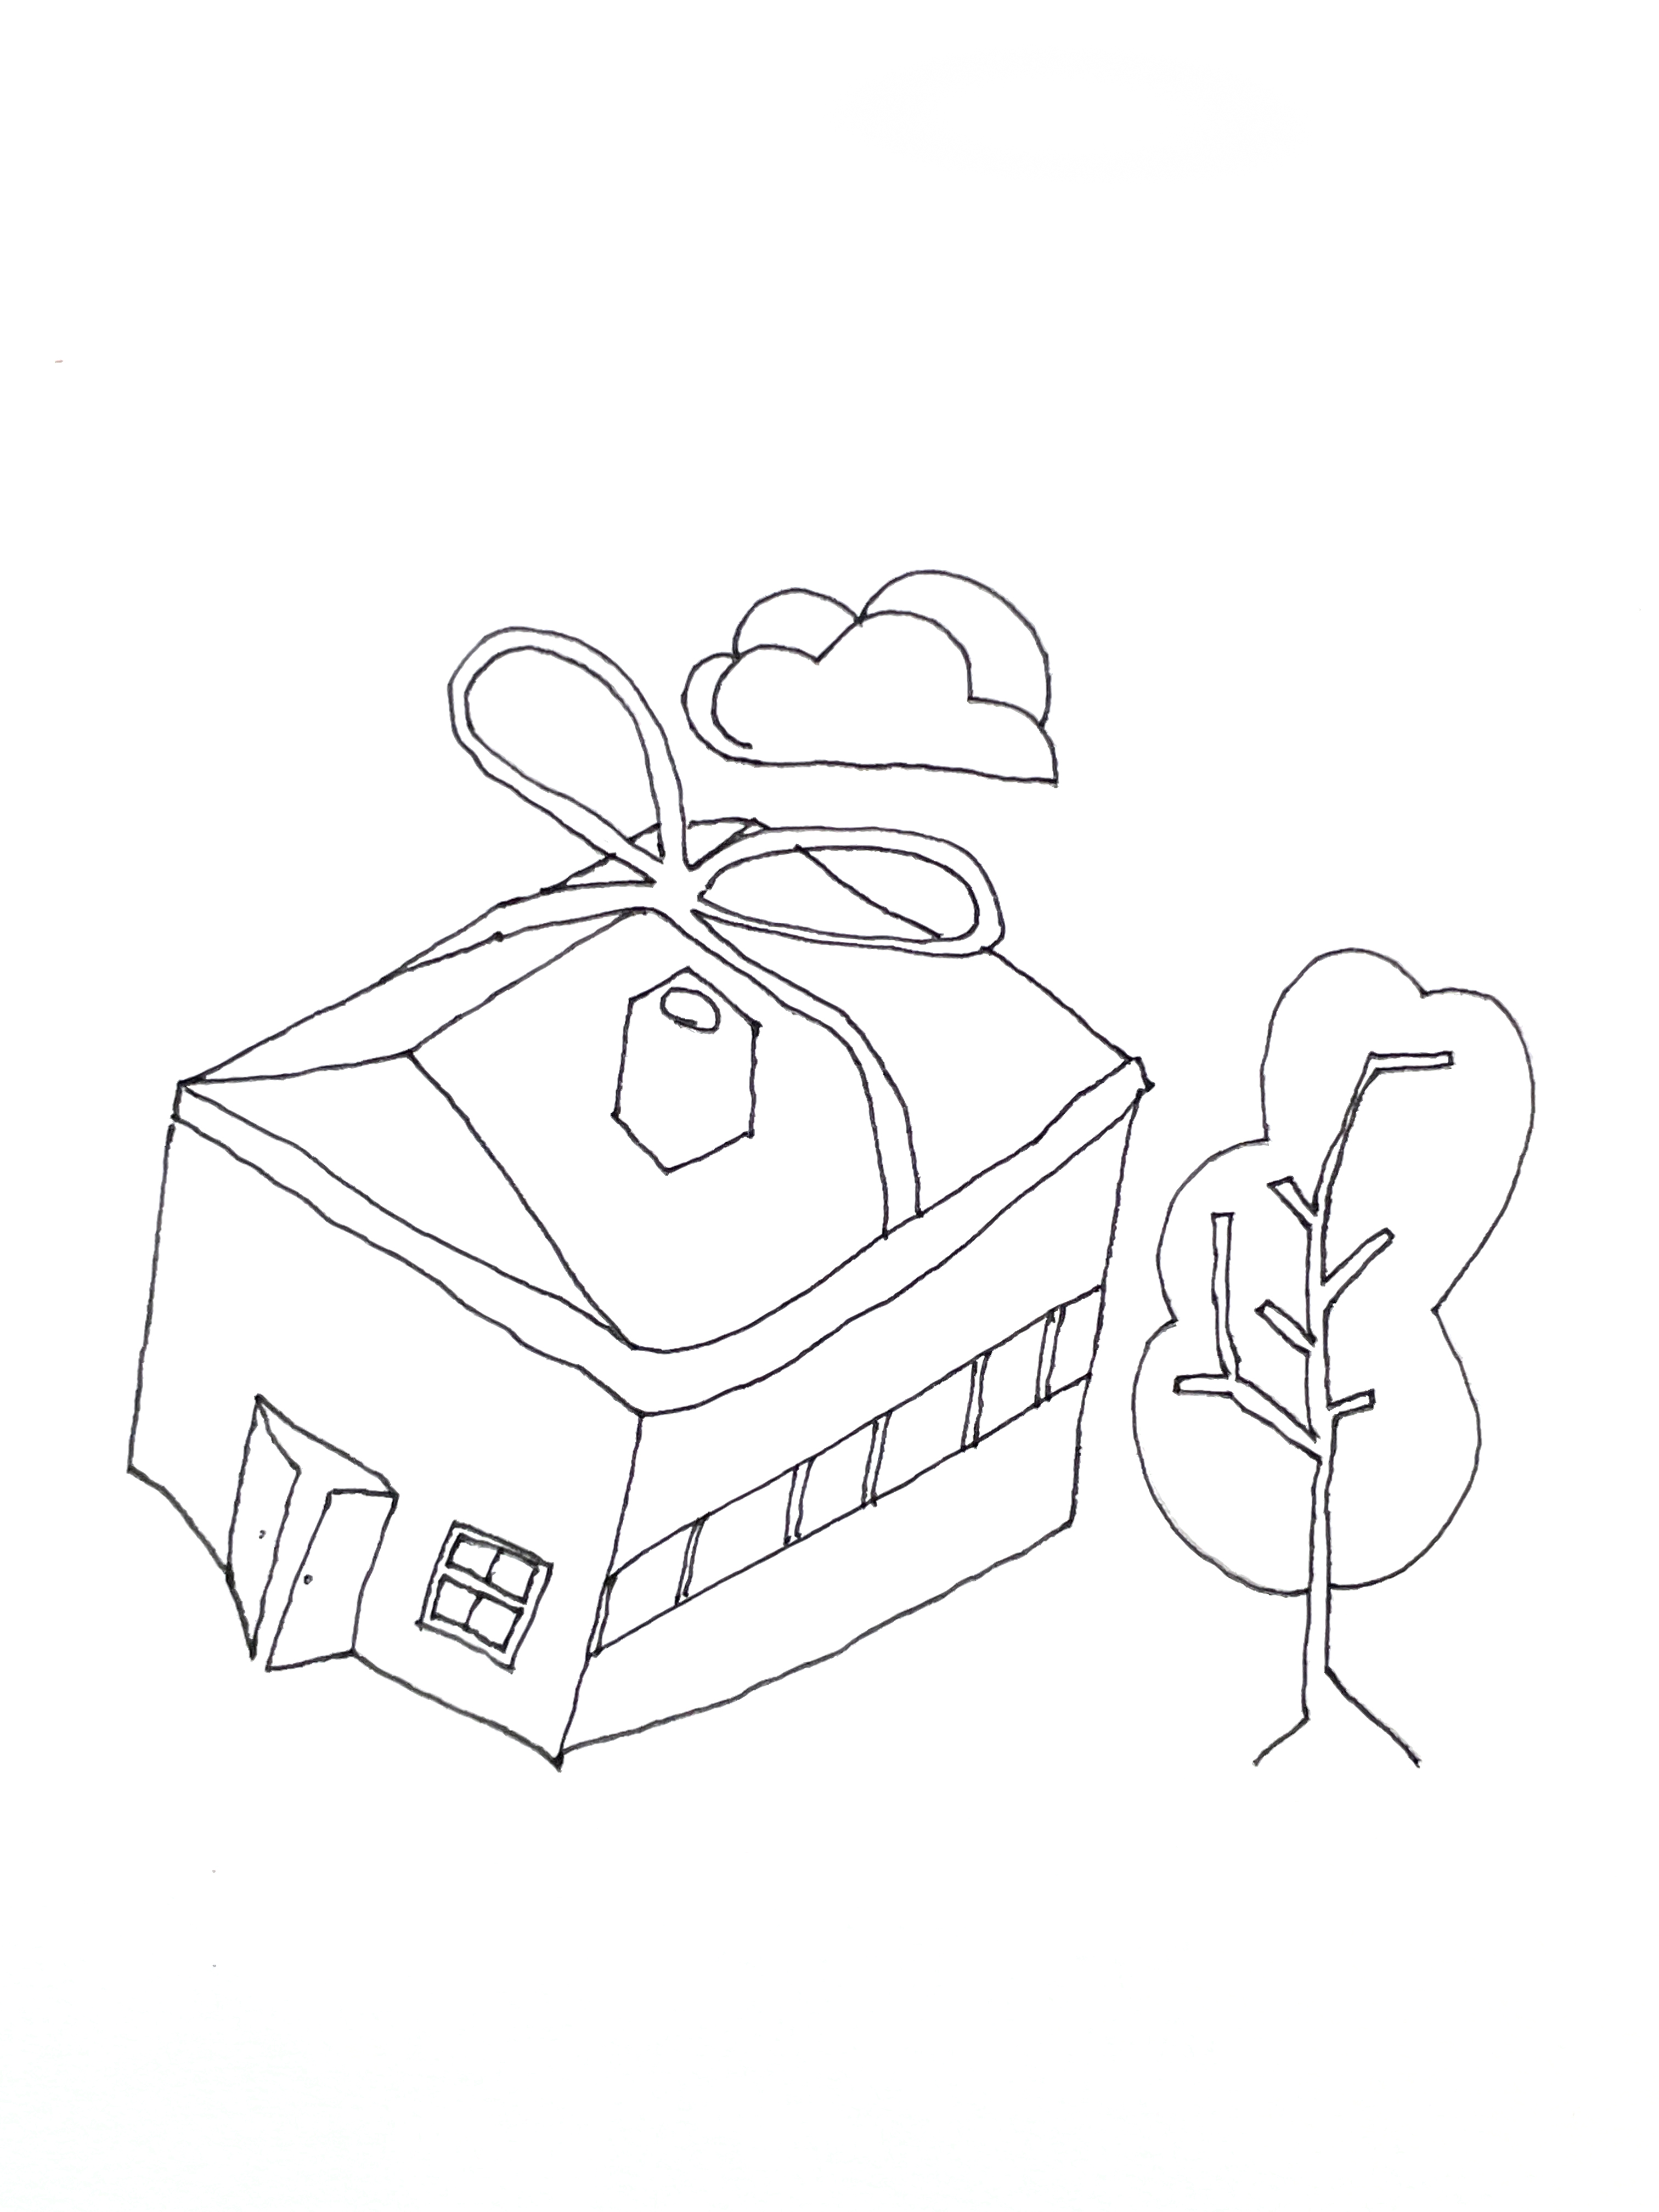 pen drawing of a house with a ribbon tied around it next to a small tree